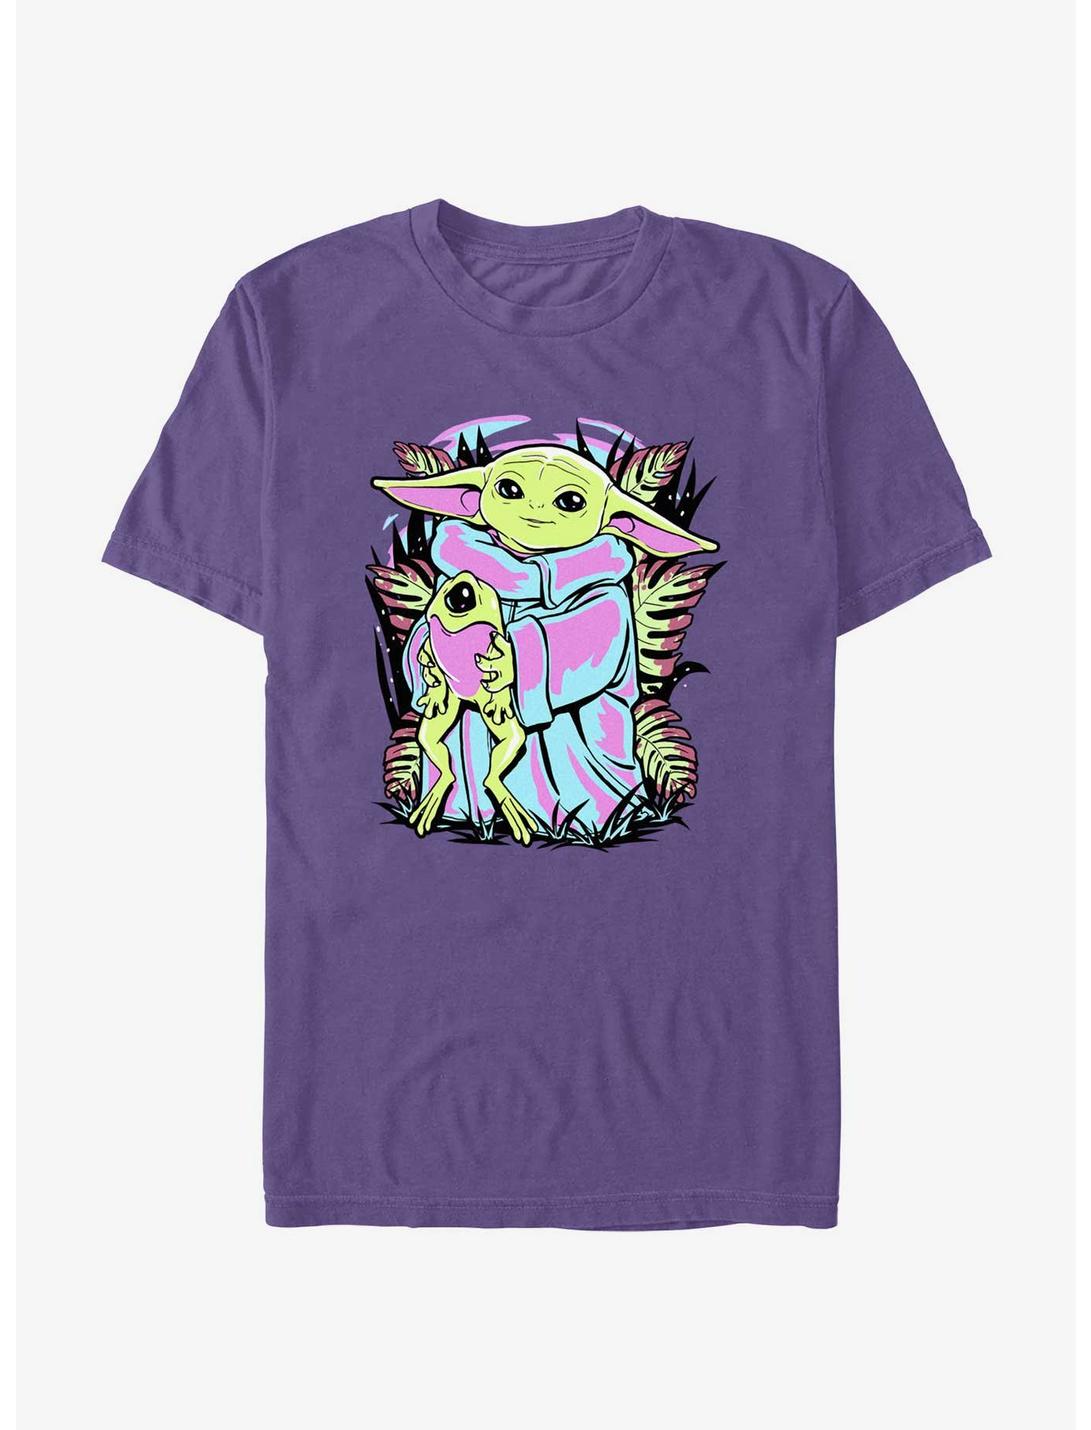 Star Wars The Mandalorian Neon Child and Frog T-Shirt, PURPLE, hi-res